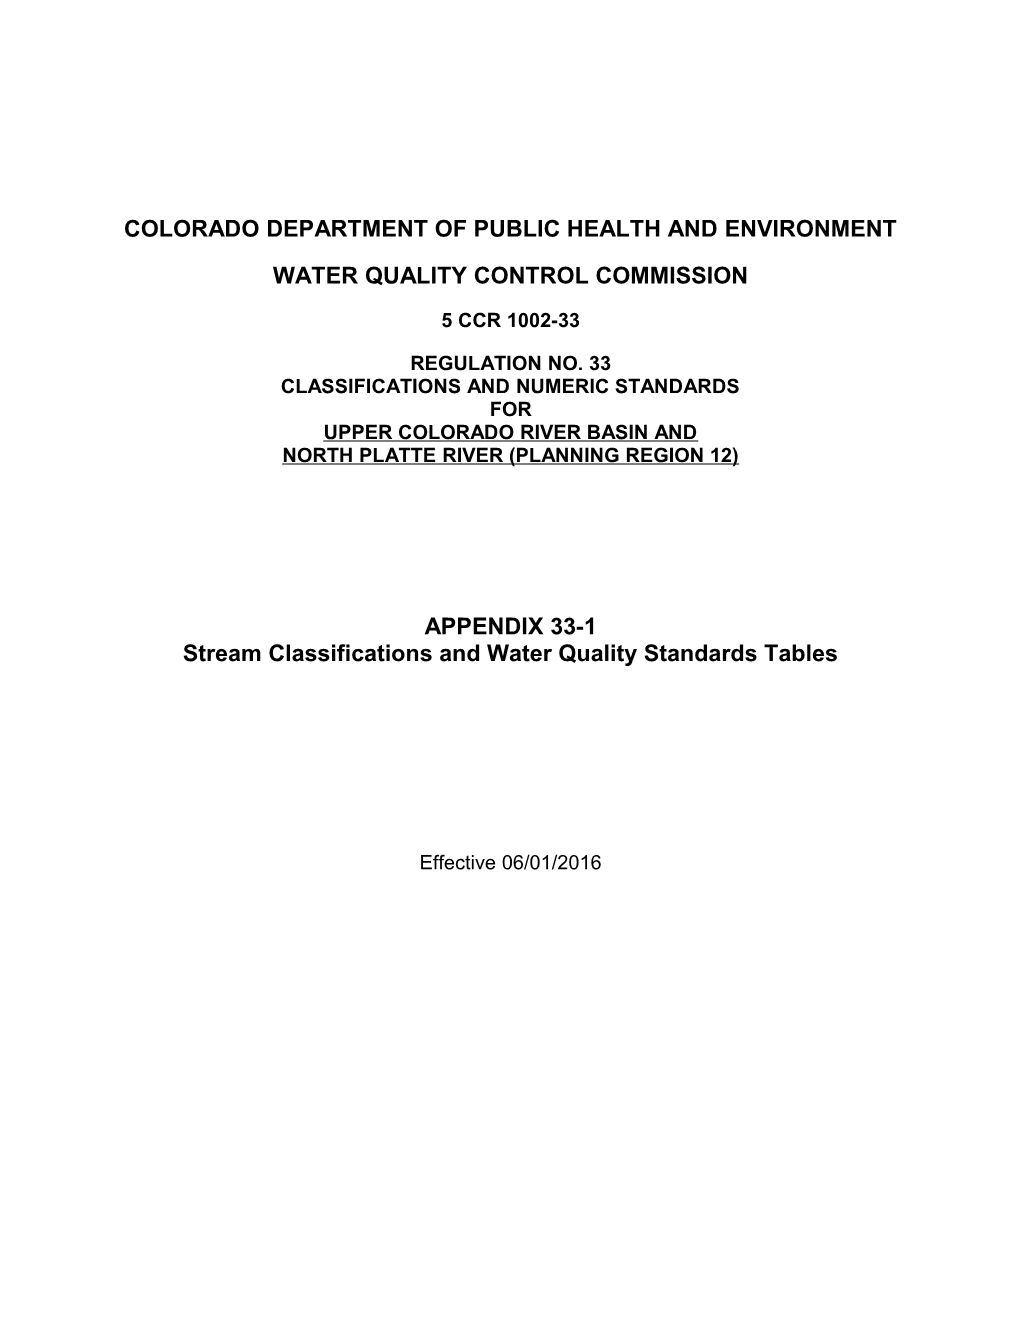 Colorado Department of Public Health and Environment s3